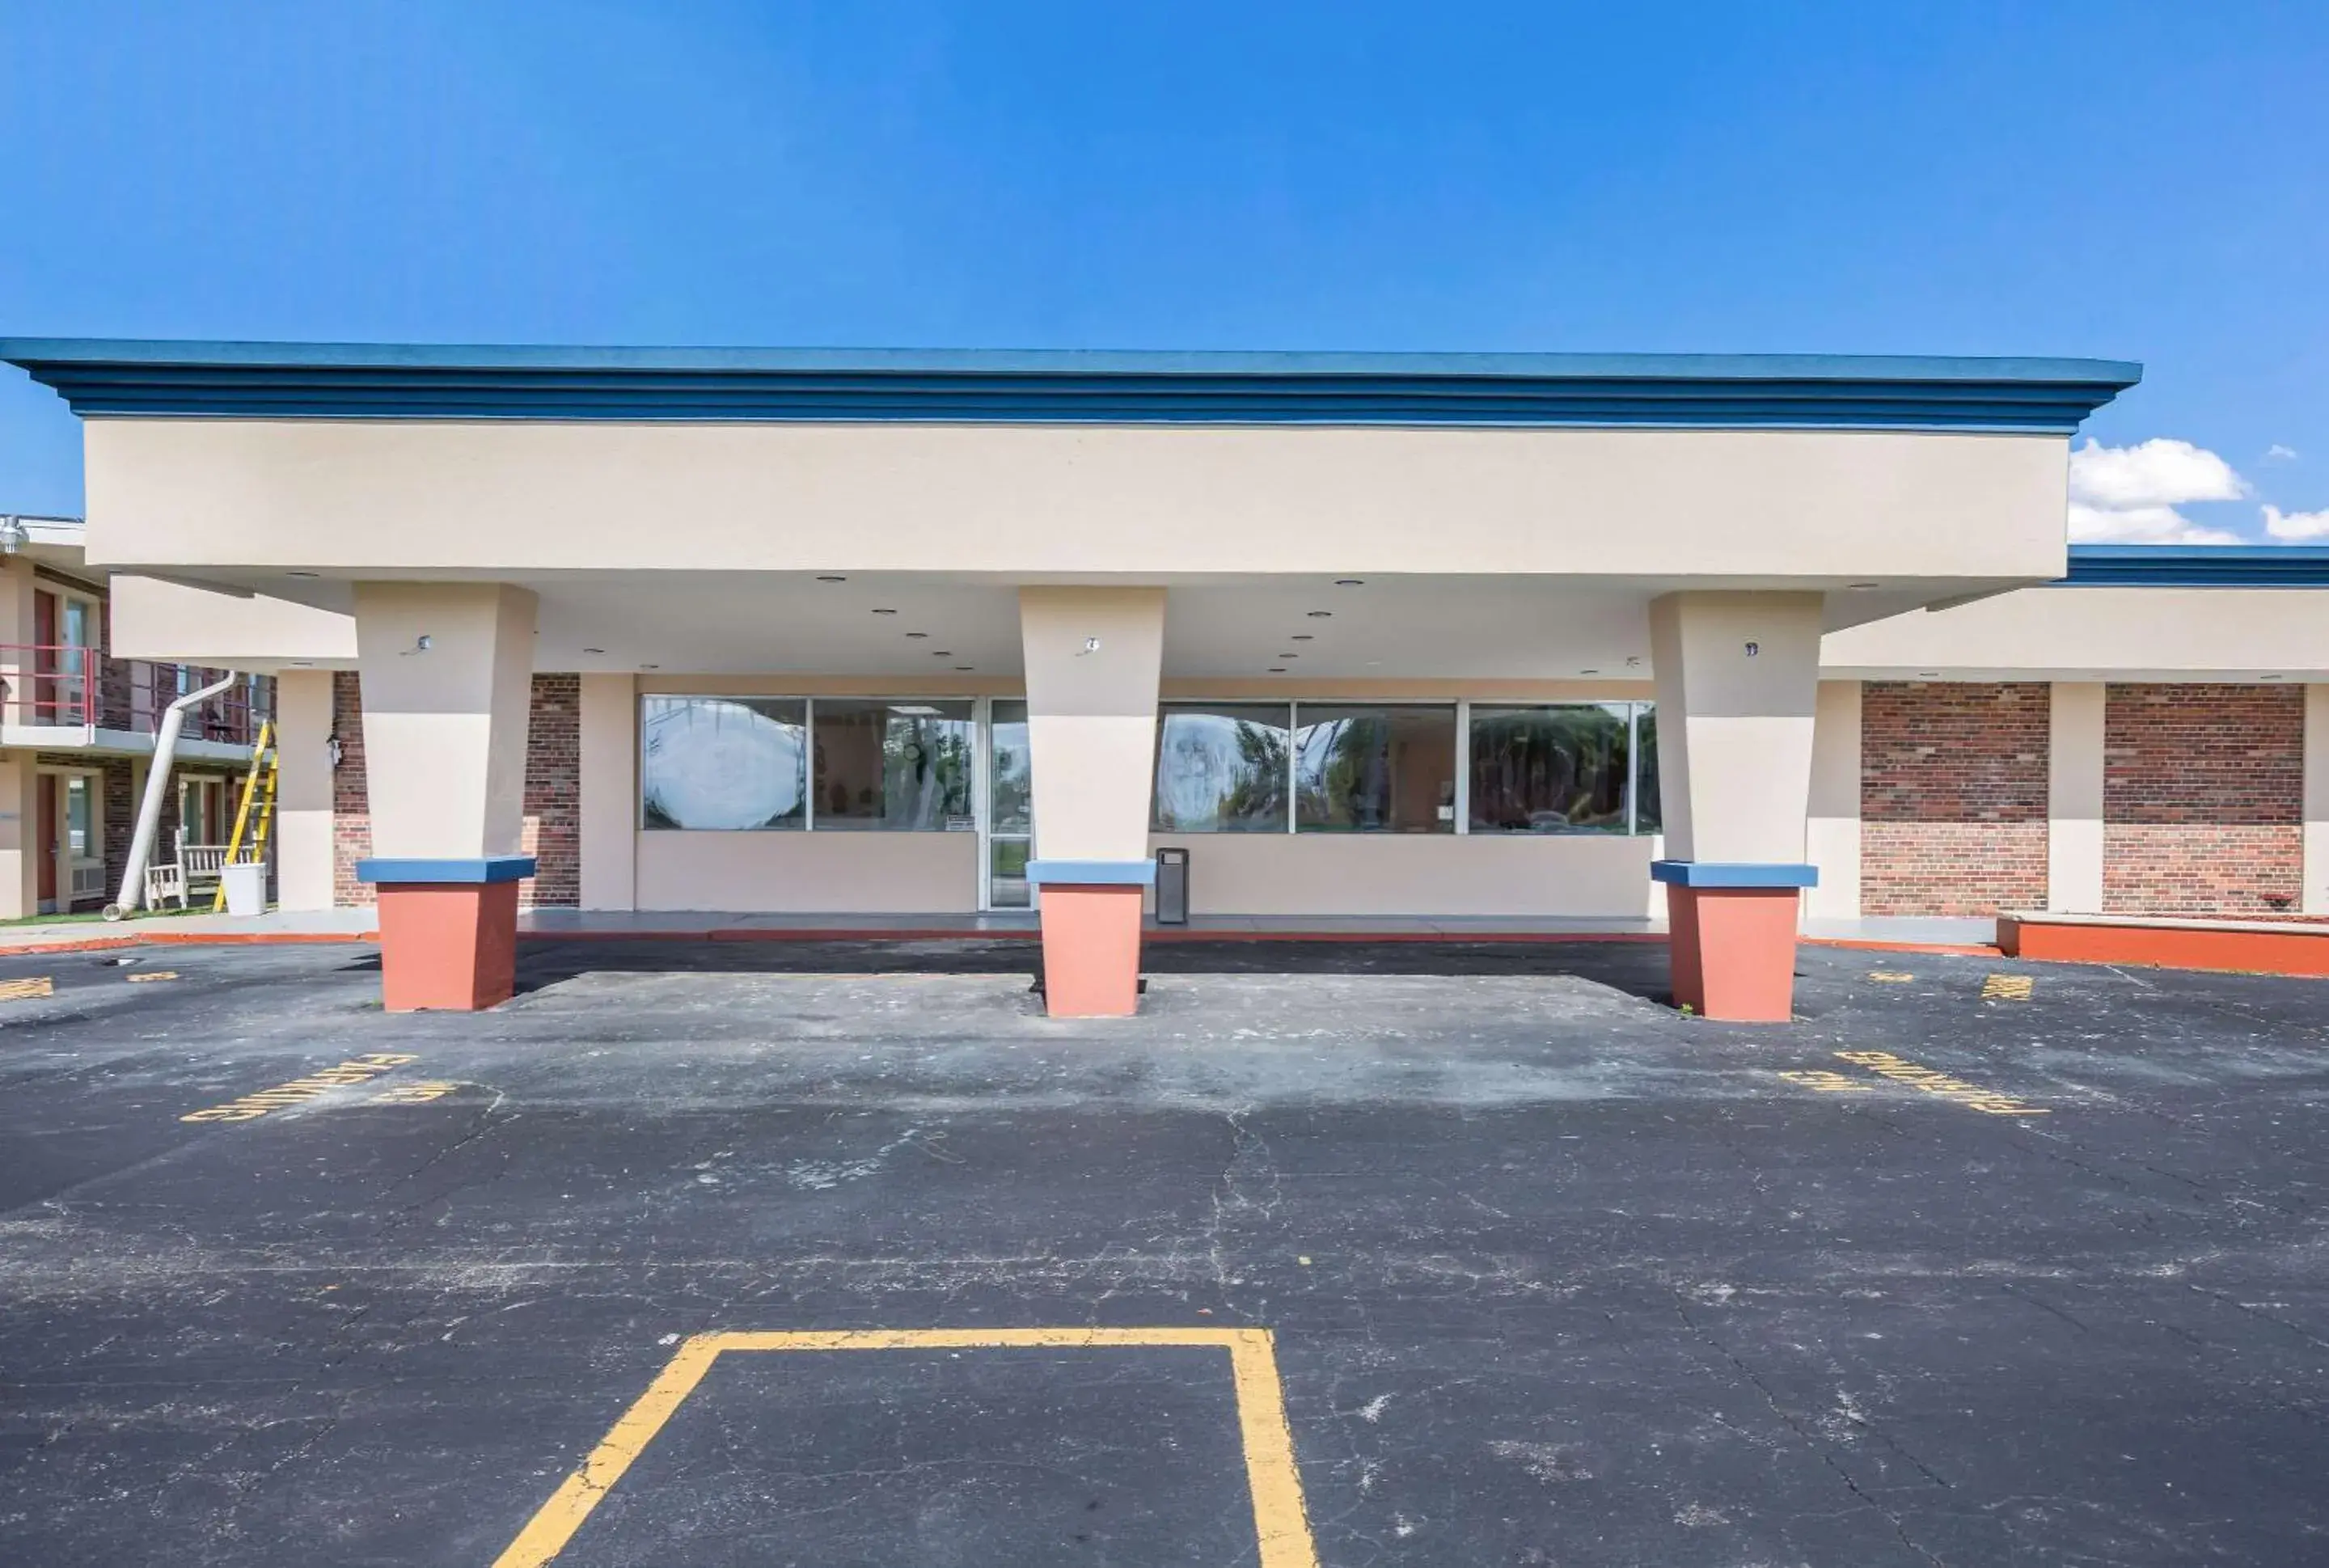 Property Building in Econo Lodge Neenah